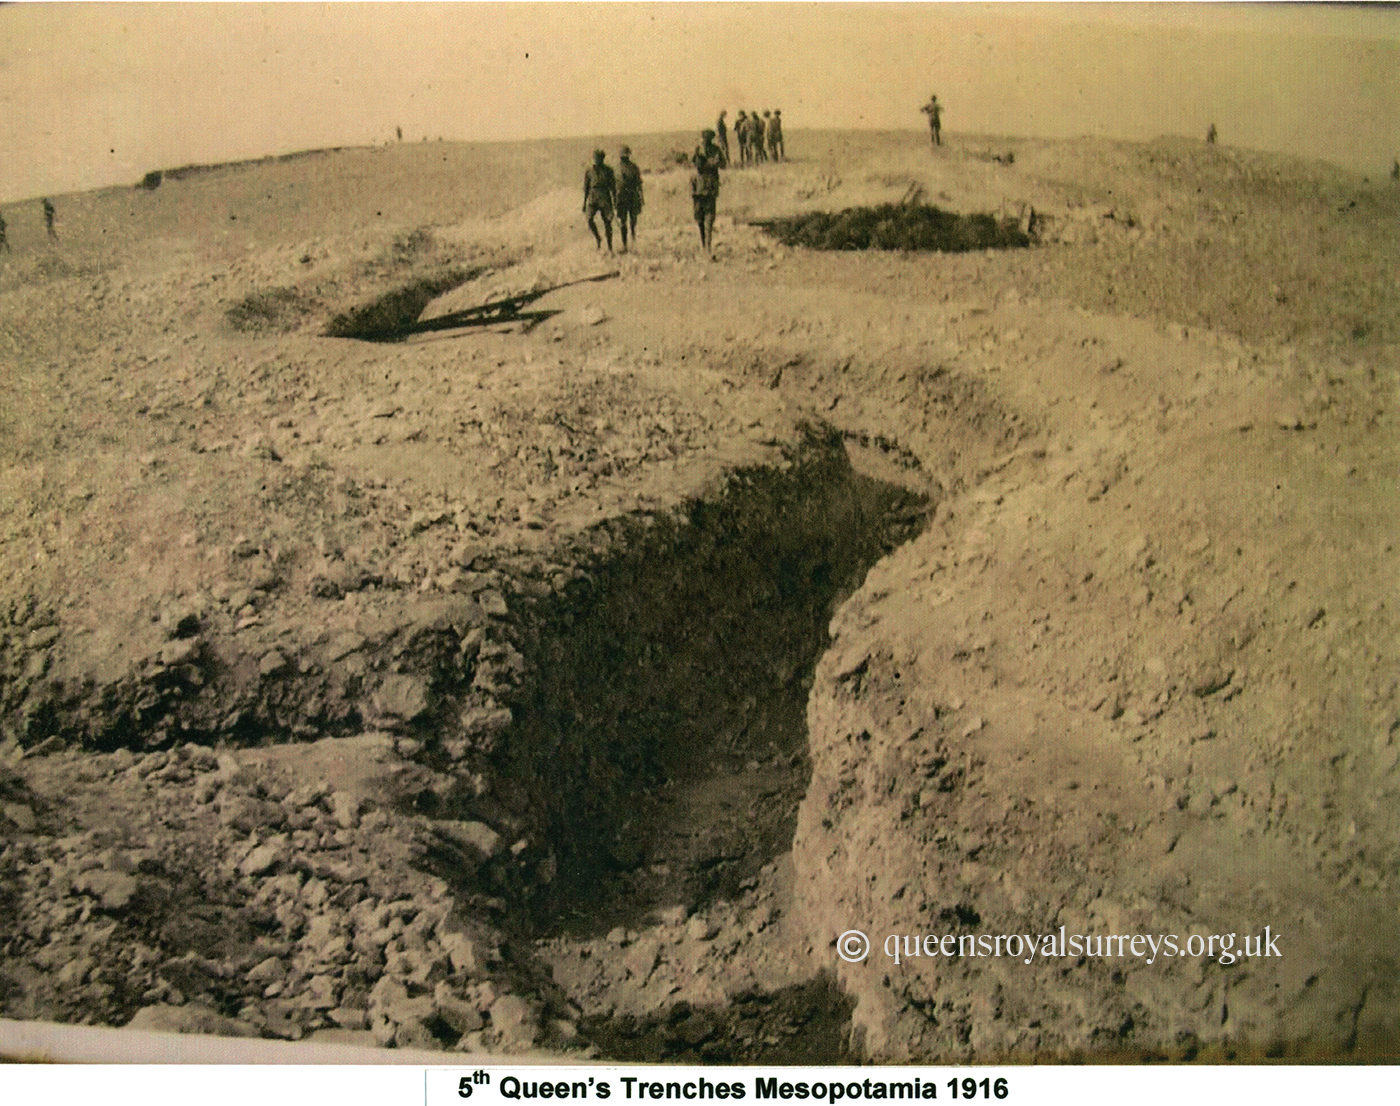 5th Queen's Trenches Mesopotamia 1916